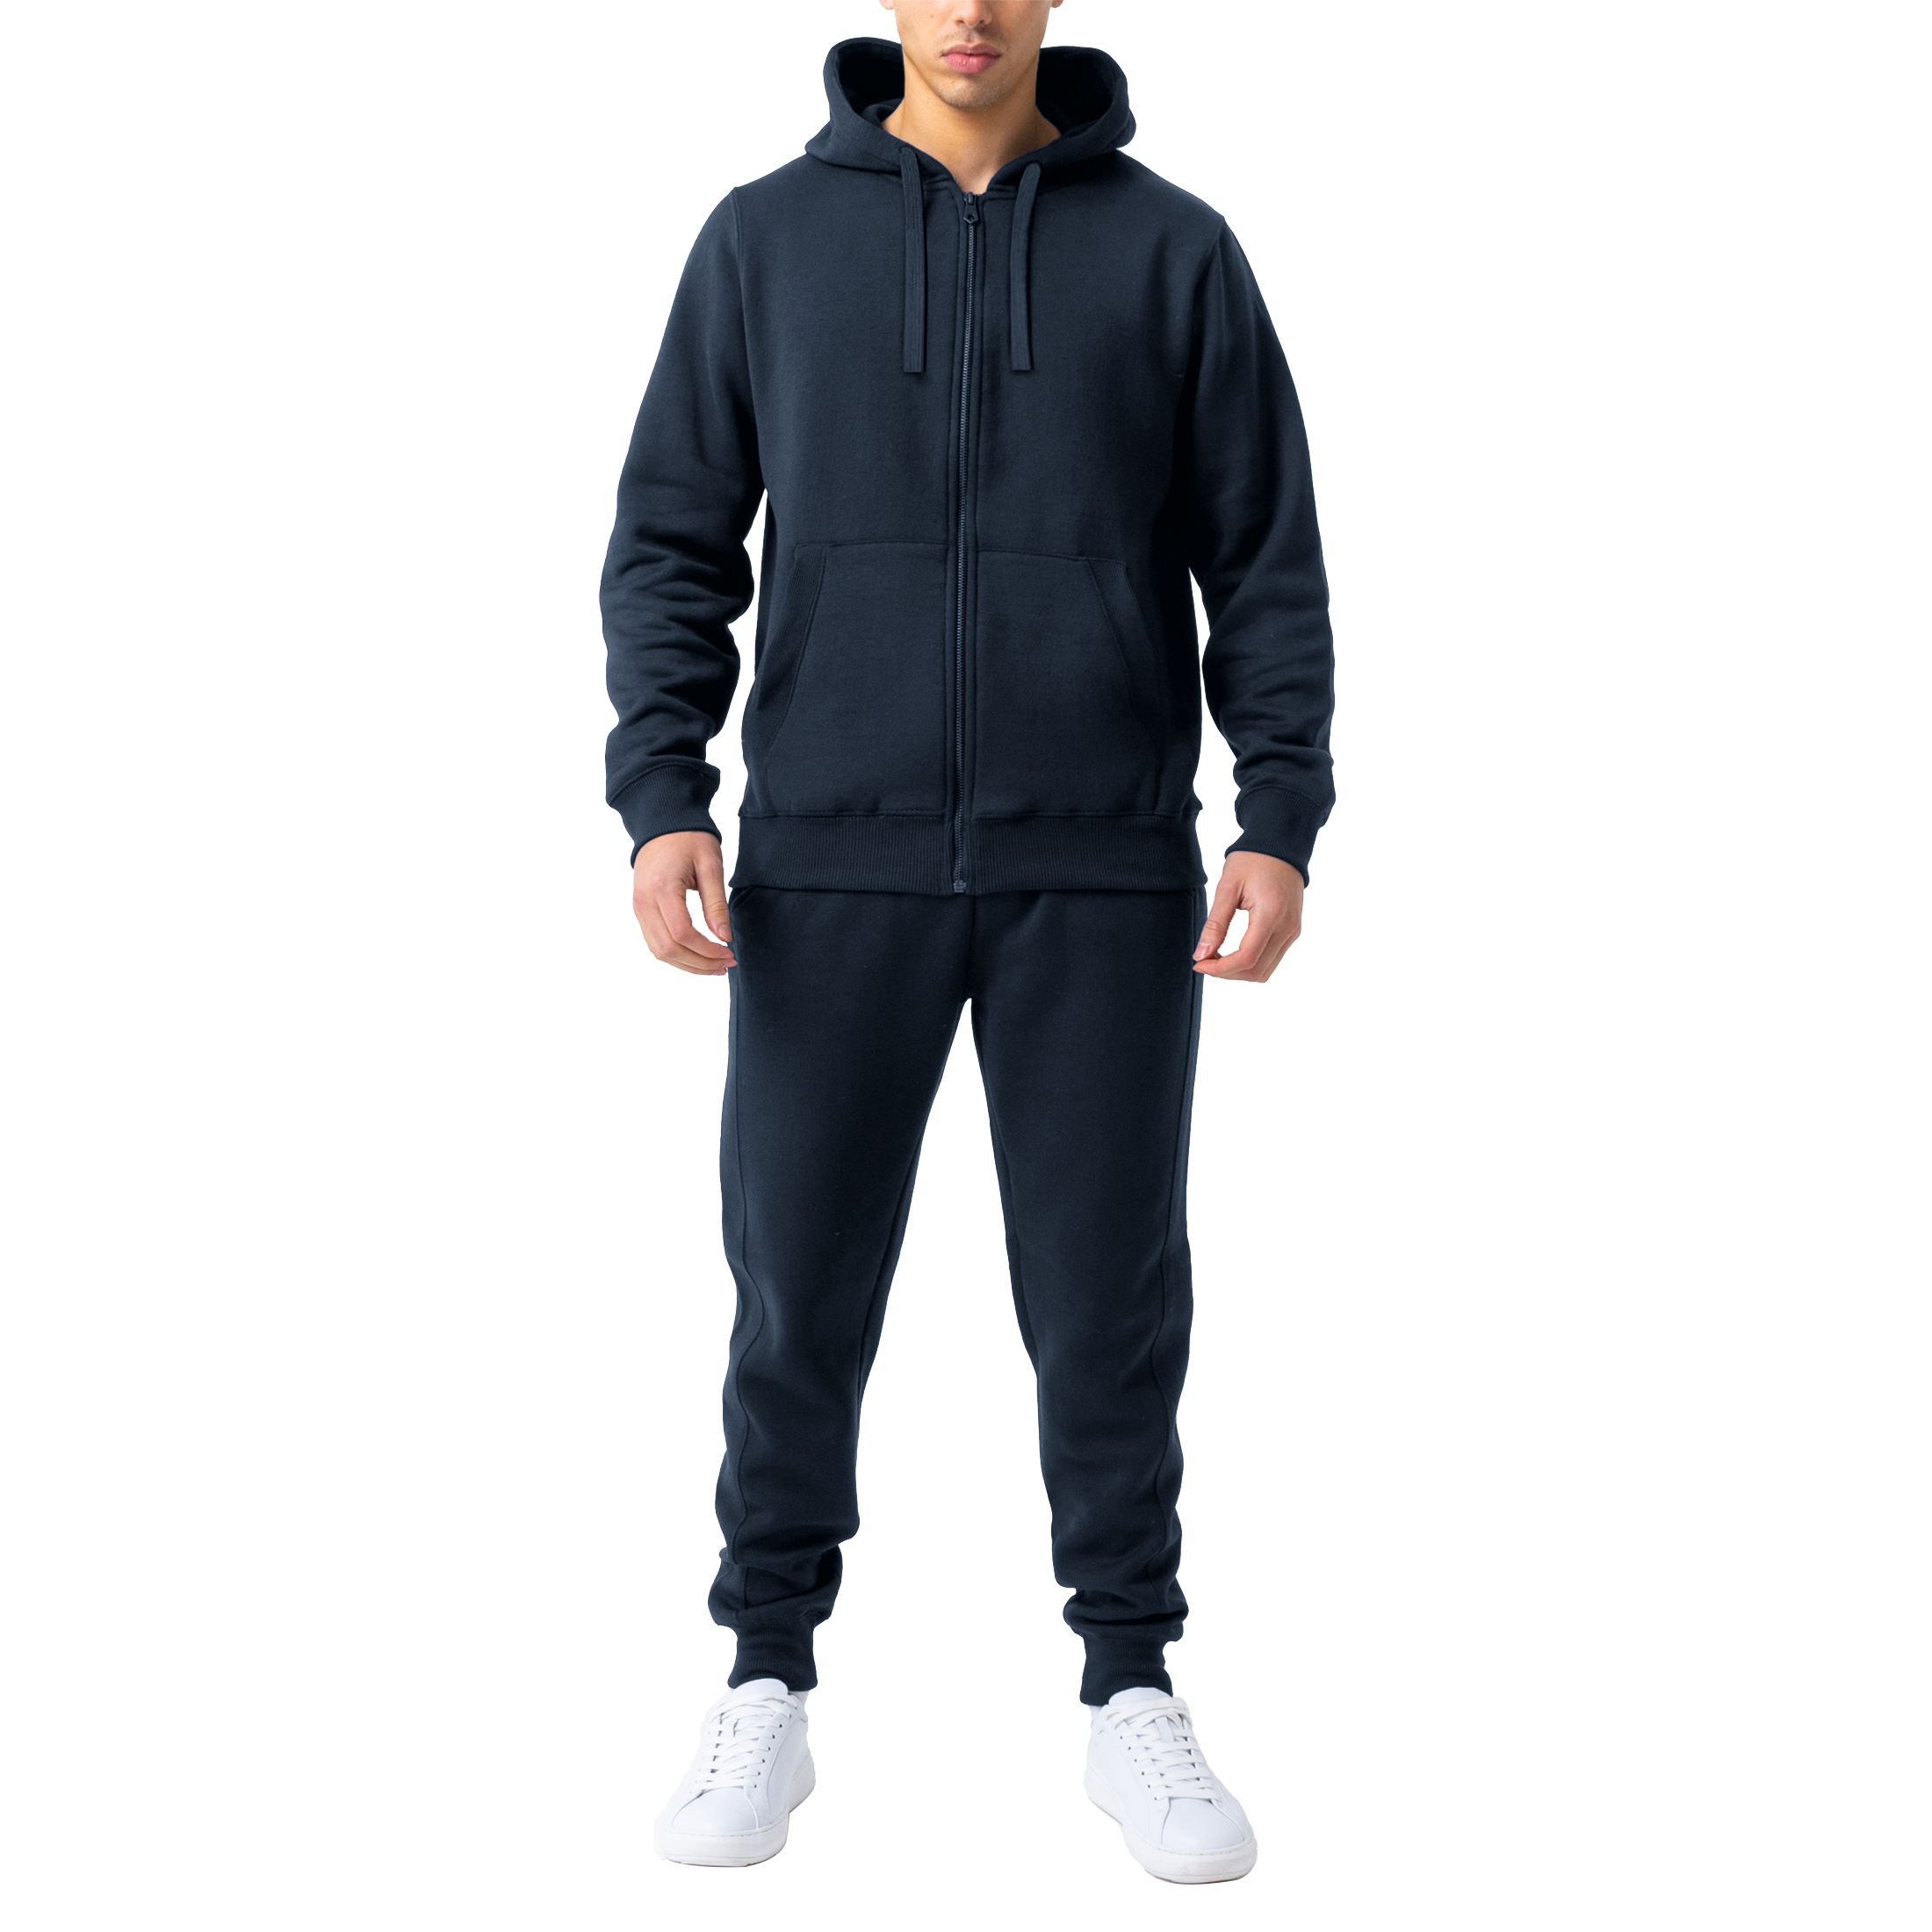 Men's Casual Jogging Athletic Active Full Zip Up Tracksuit - Navy, 4X-Large